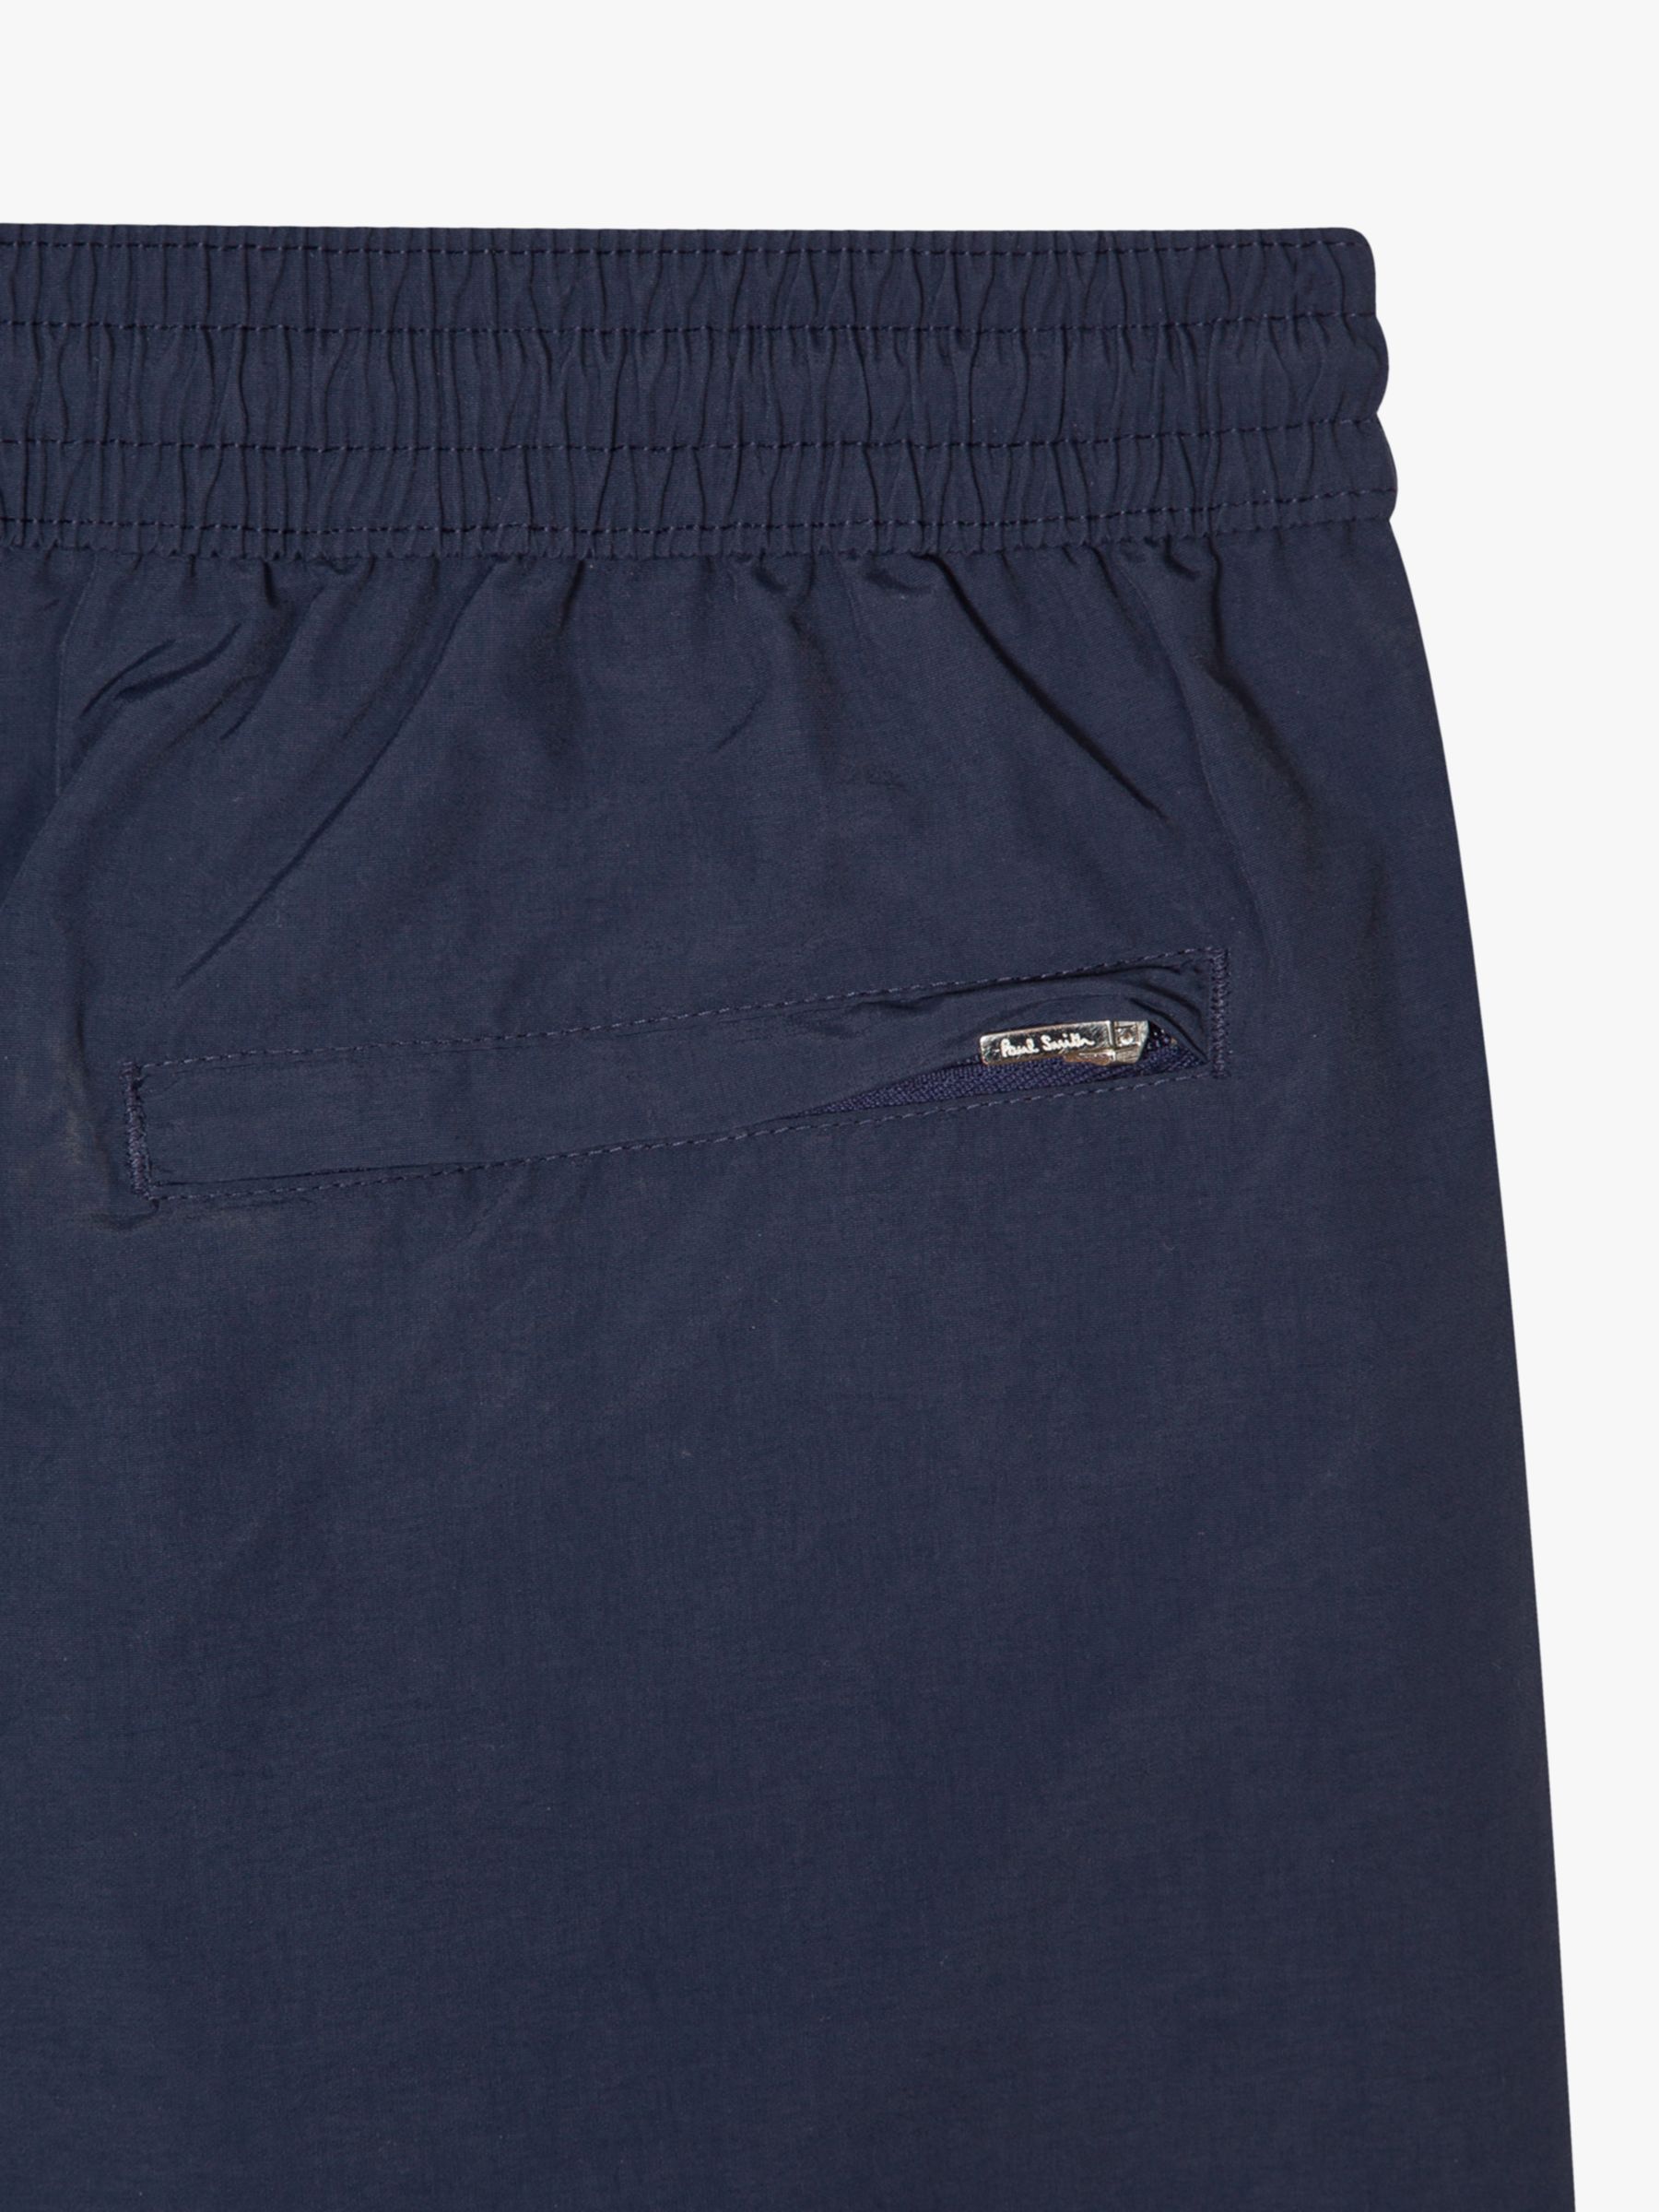 Buy PS Paul Smith Swim Shorts Online at johnlewis.com